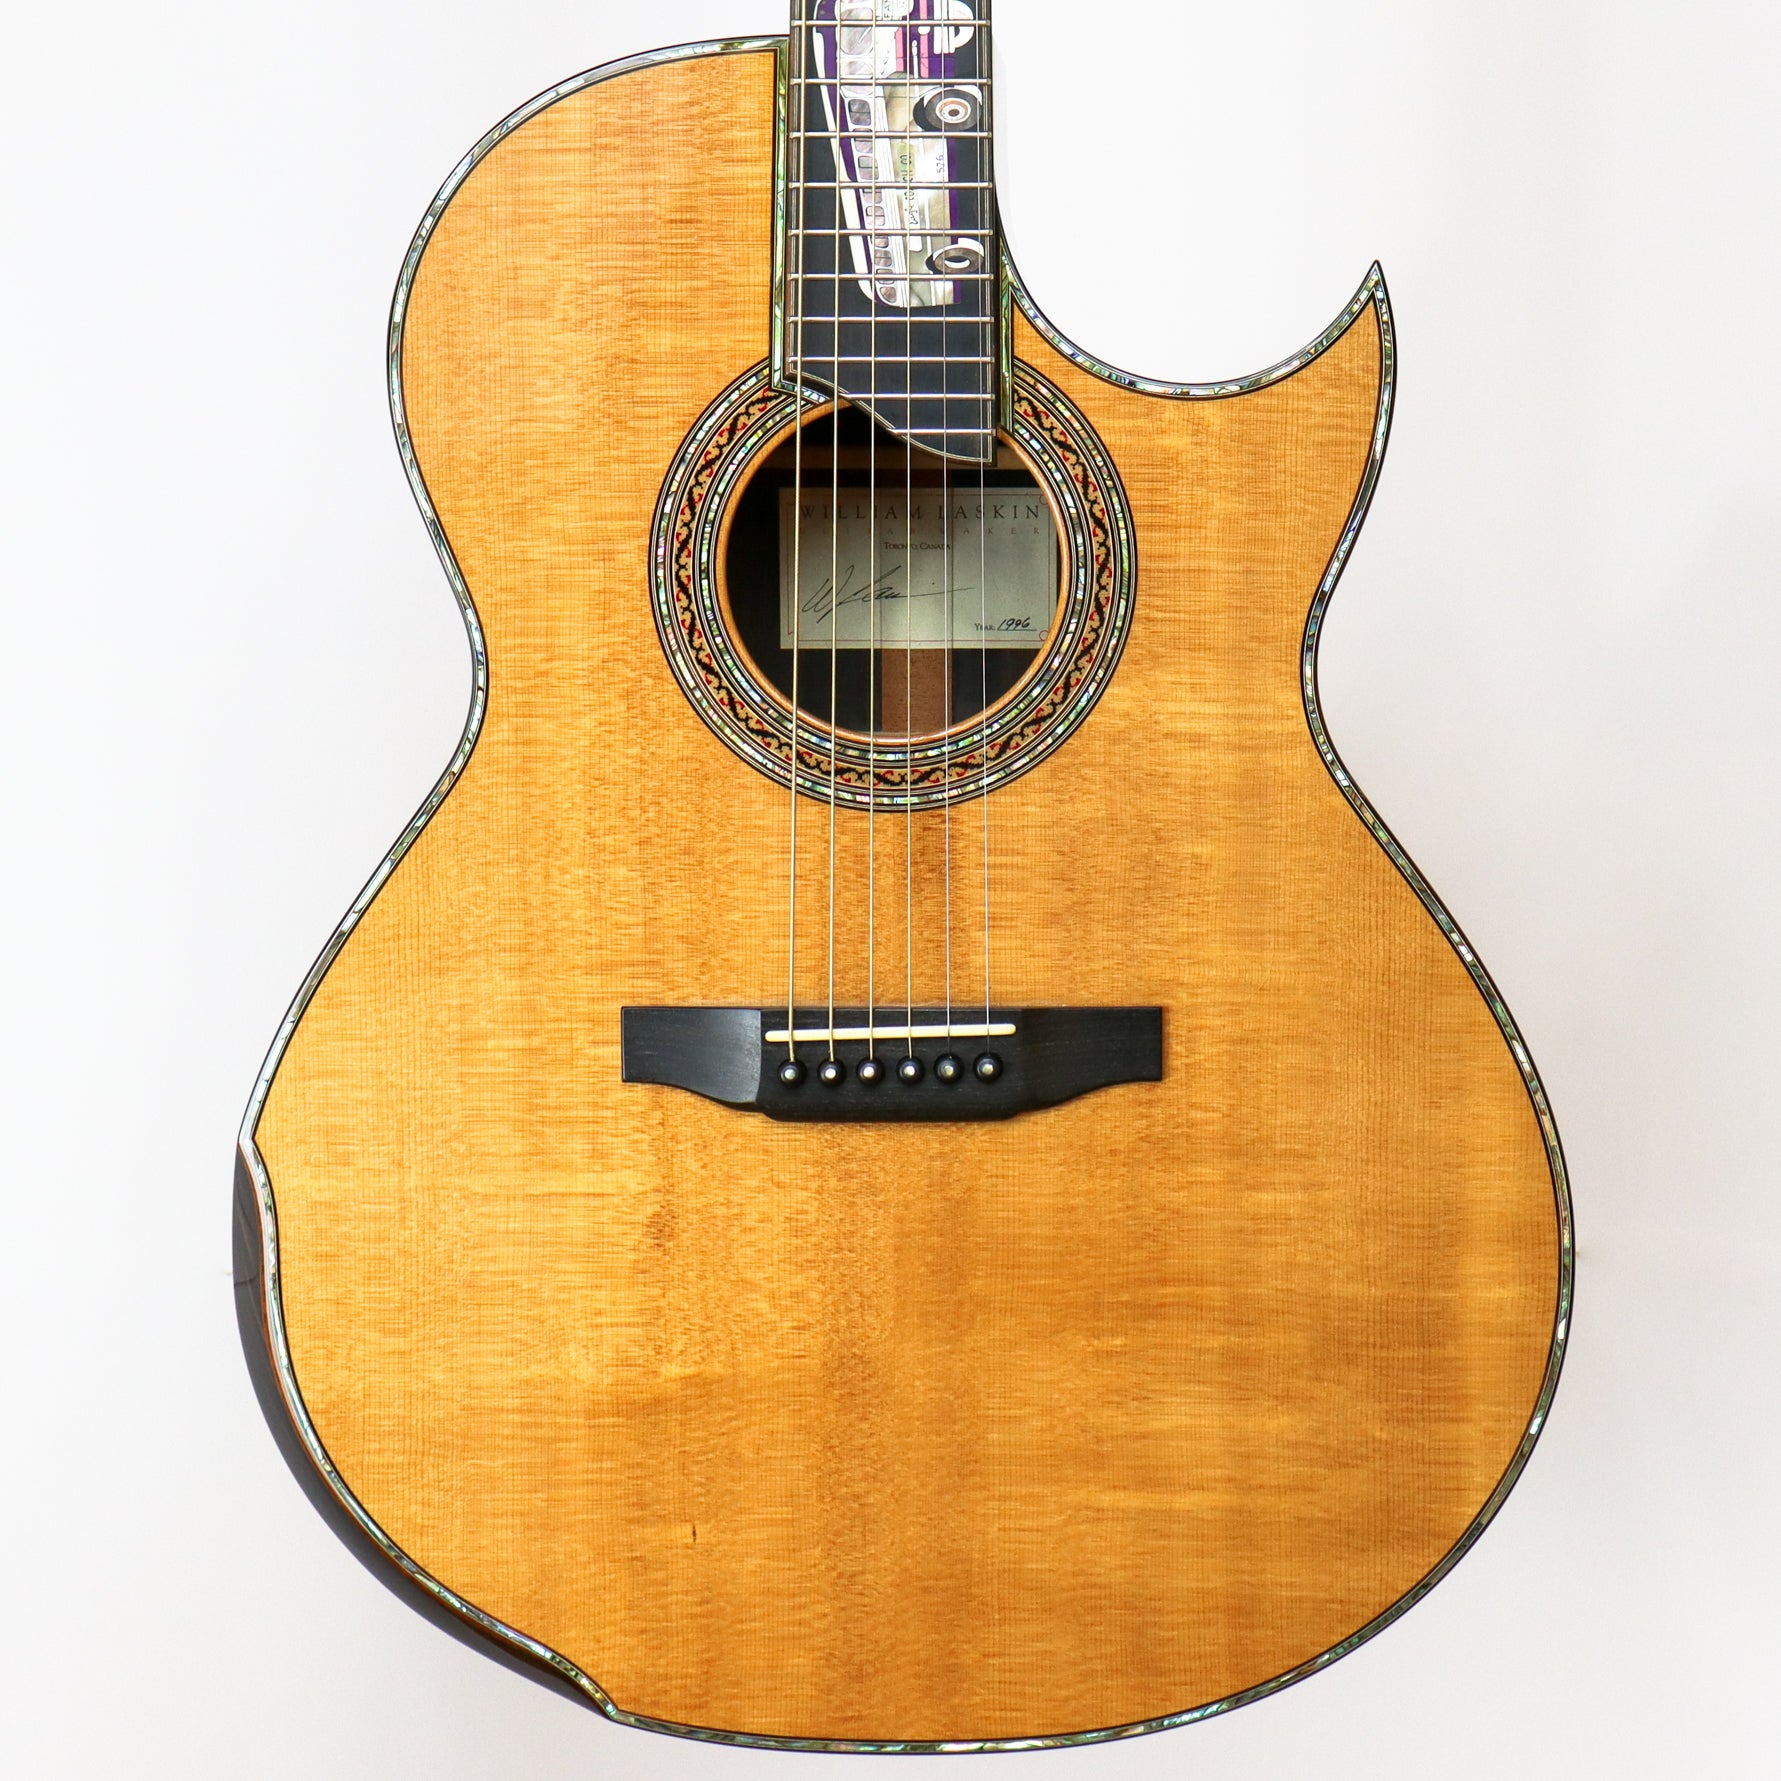 Laskin 1996 Custom Acoustic with Pearl Inlays